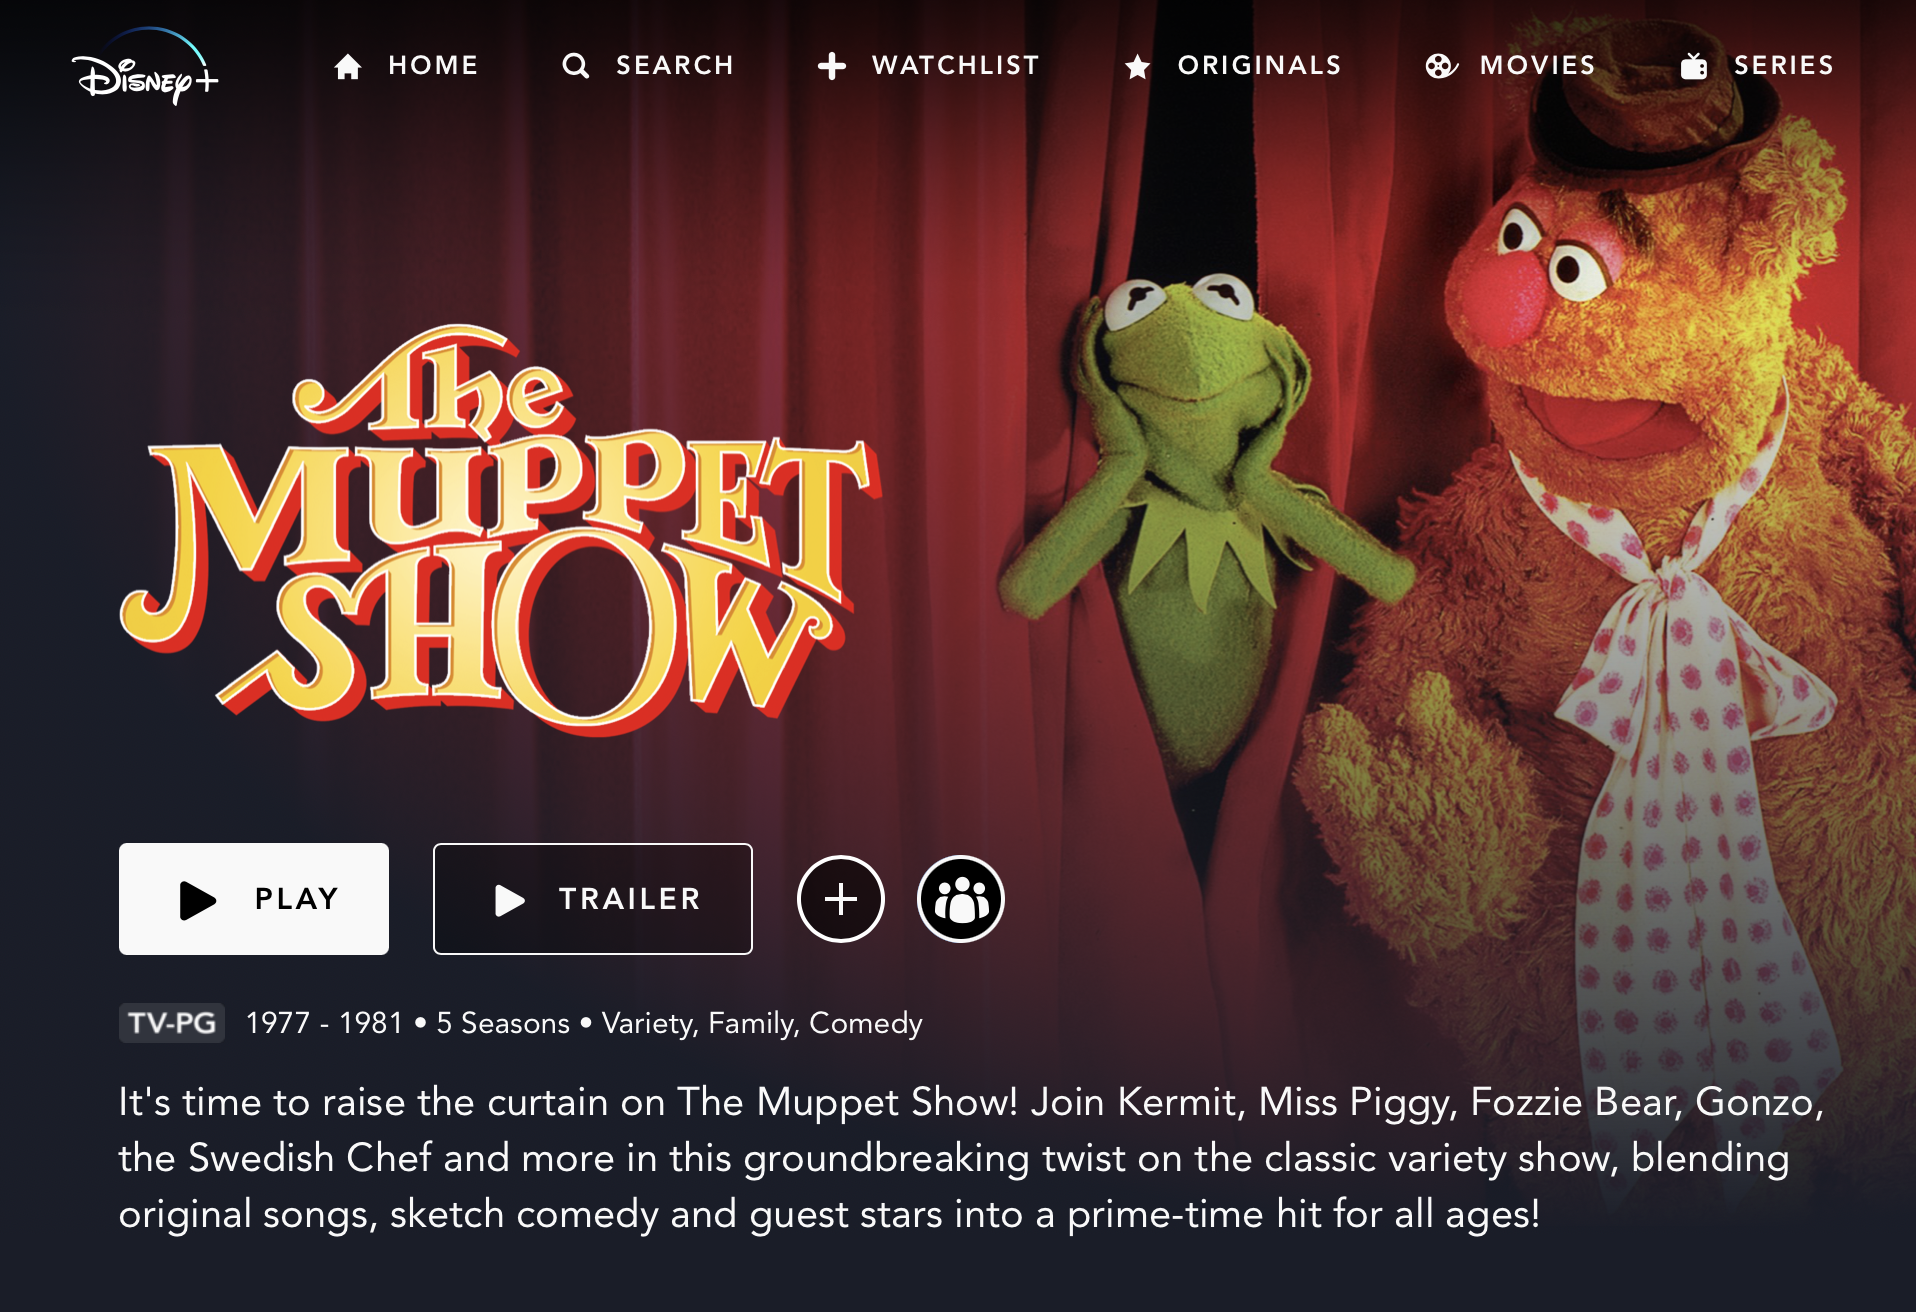 'The Muppet Show' Features Content Warning and Missing Episodes on Disney+